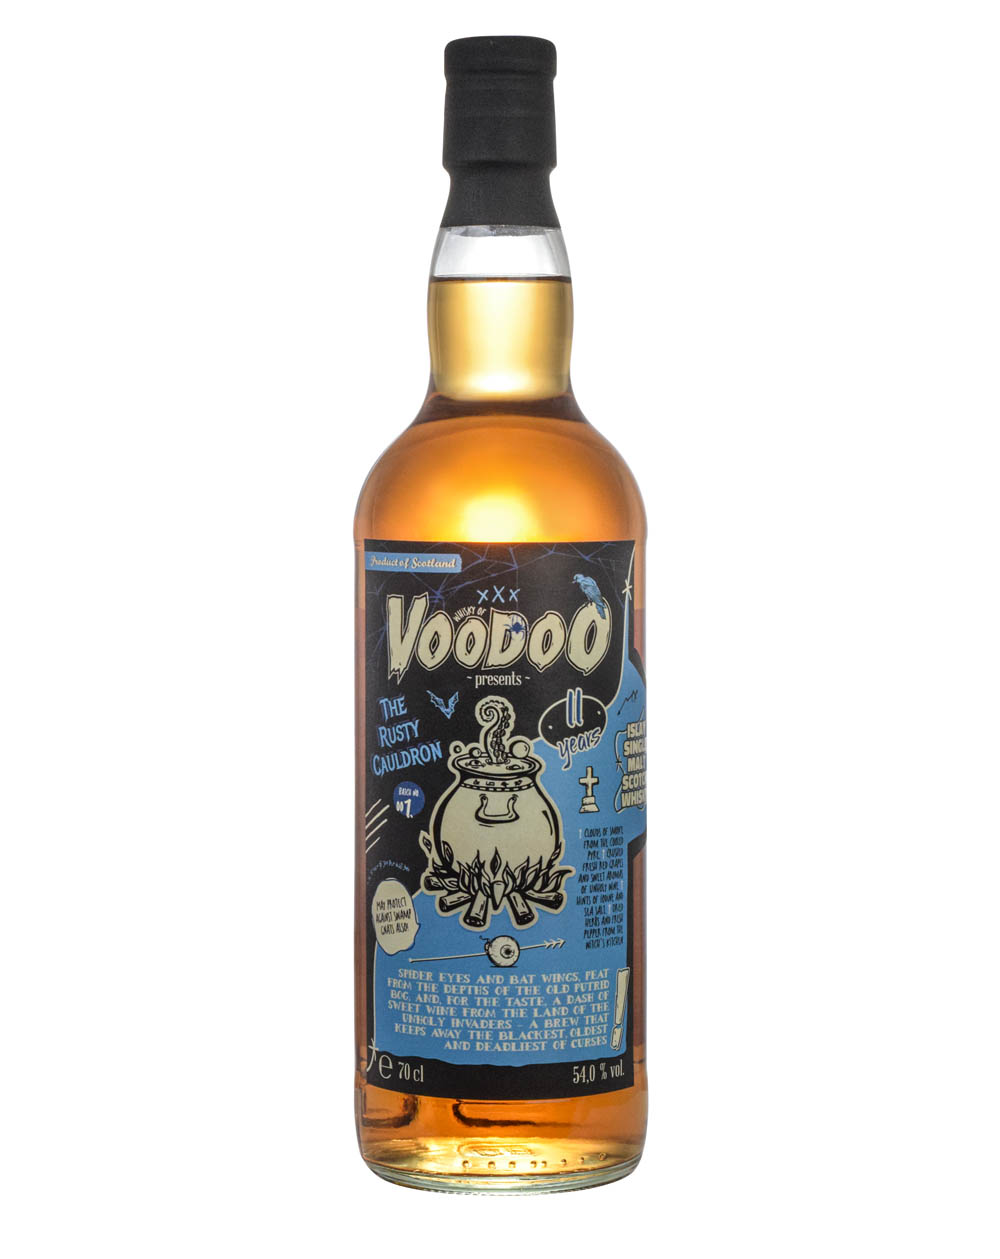 Caol Ila 11 Years Old Whisky Of Voodoo The Rusty Cauldron Batch 1 Must Have Malts MHM